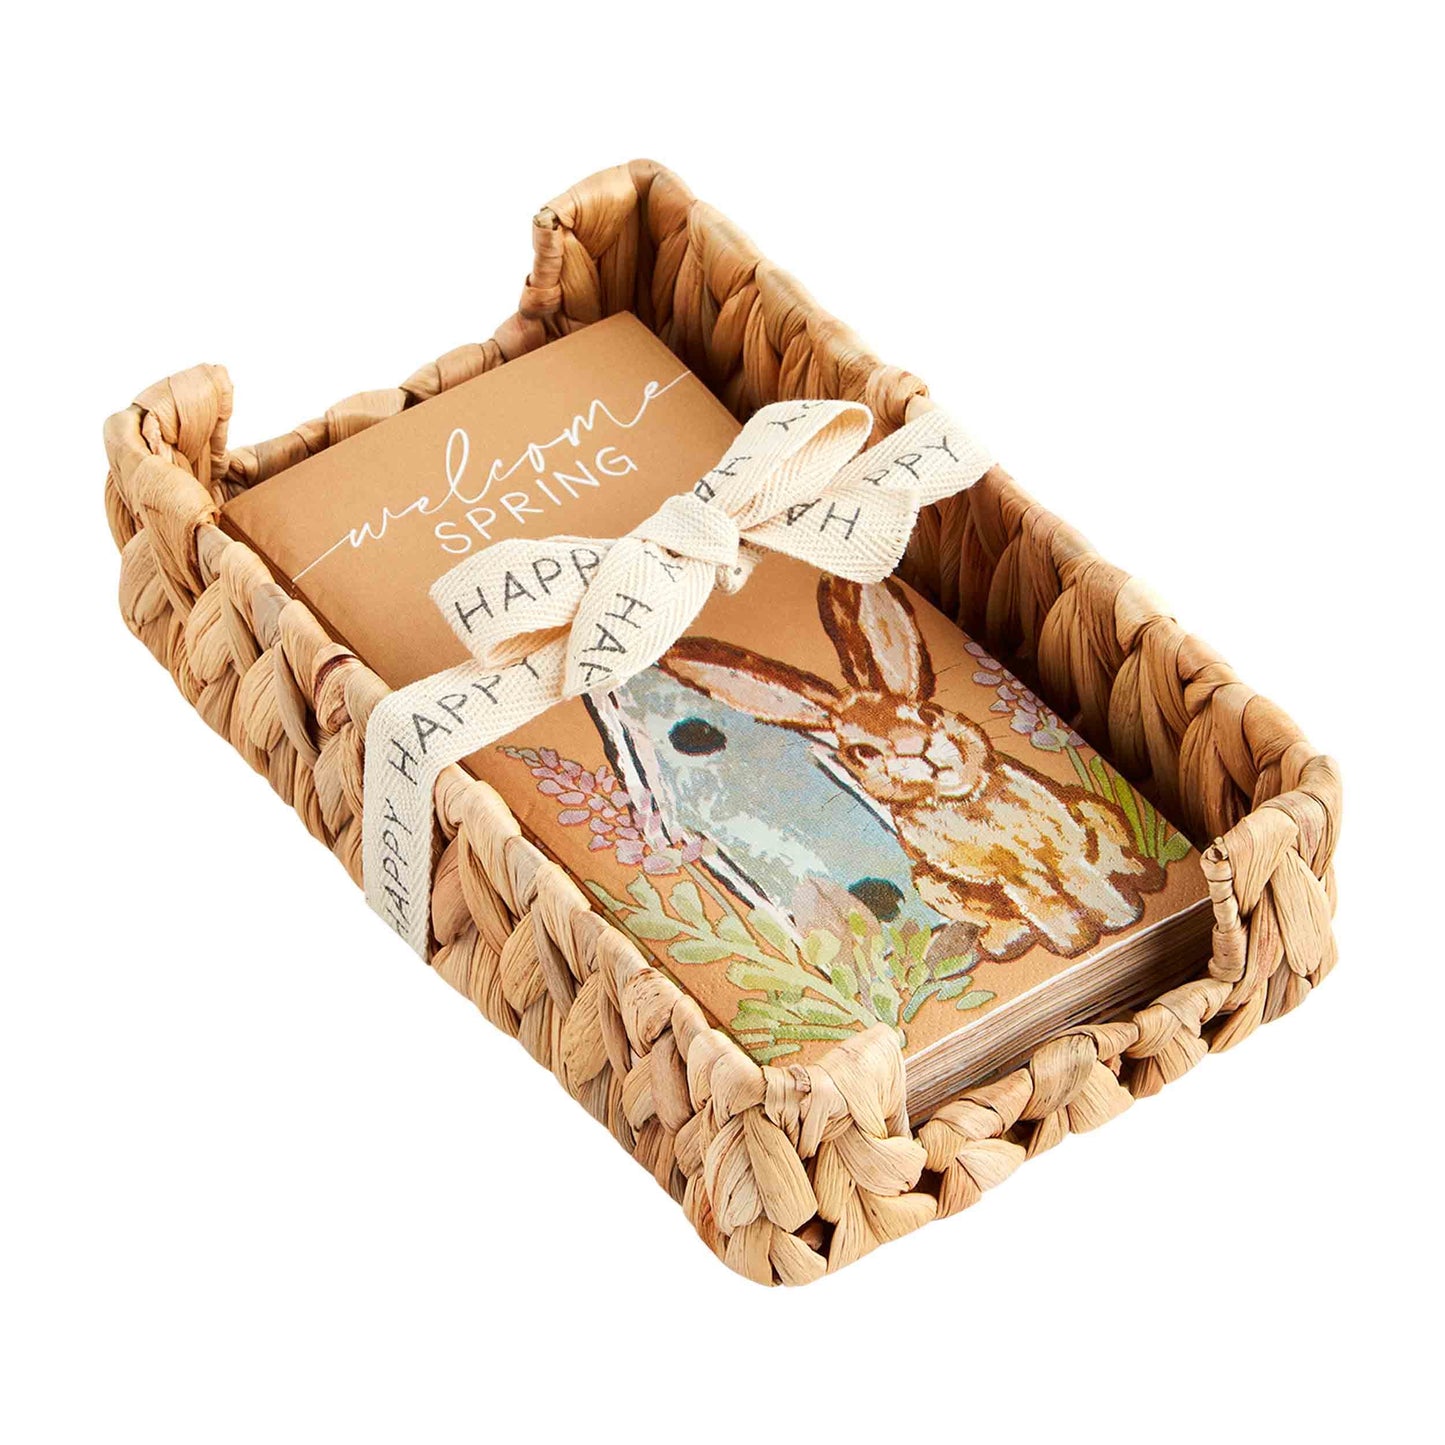 WELCOME SPRING GUEST TOWEL AND BASKET SET